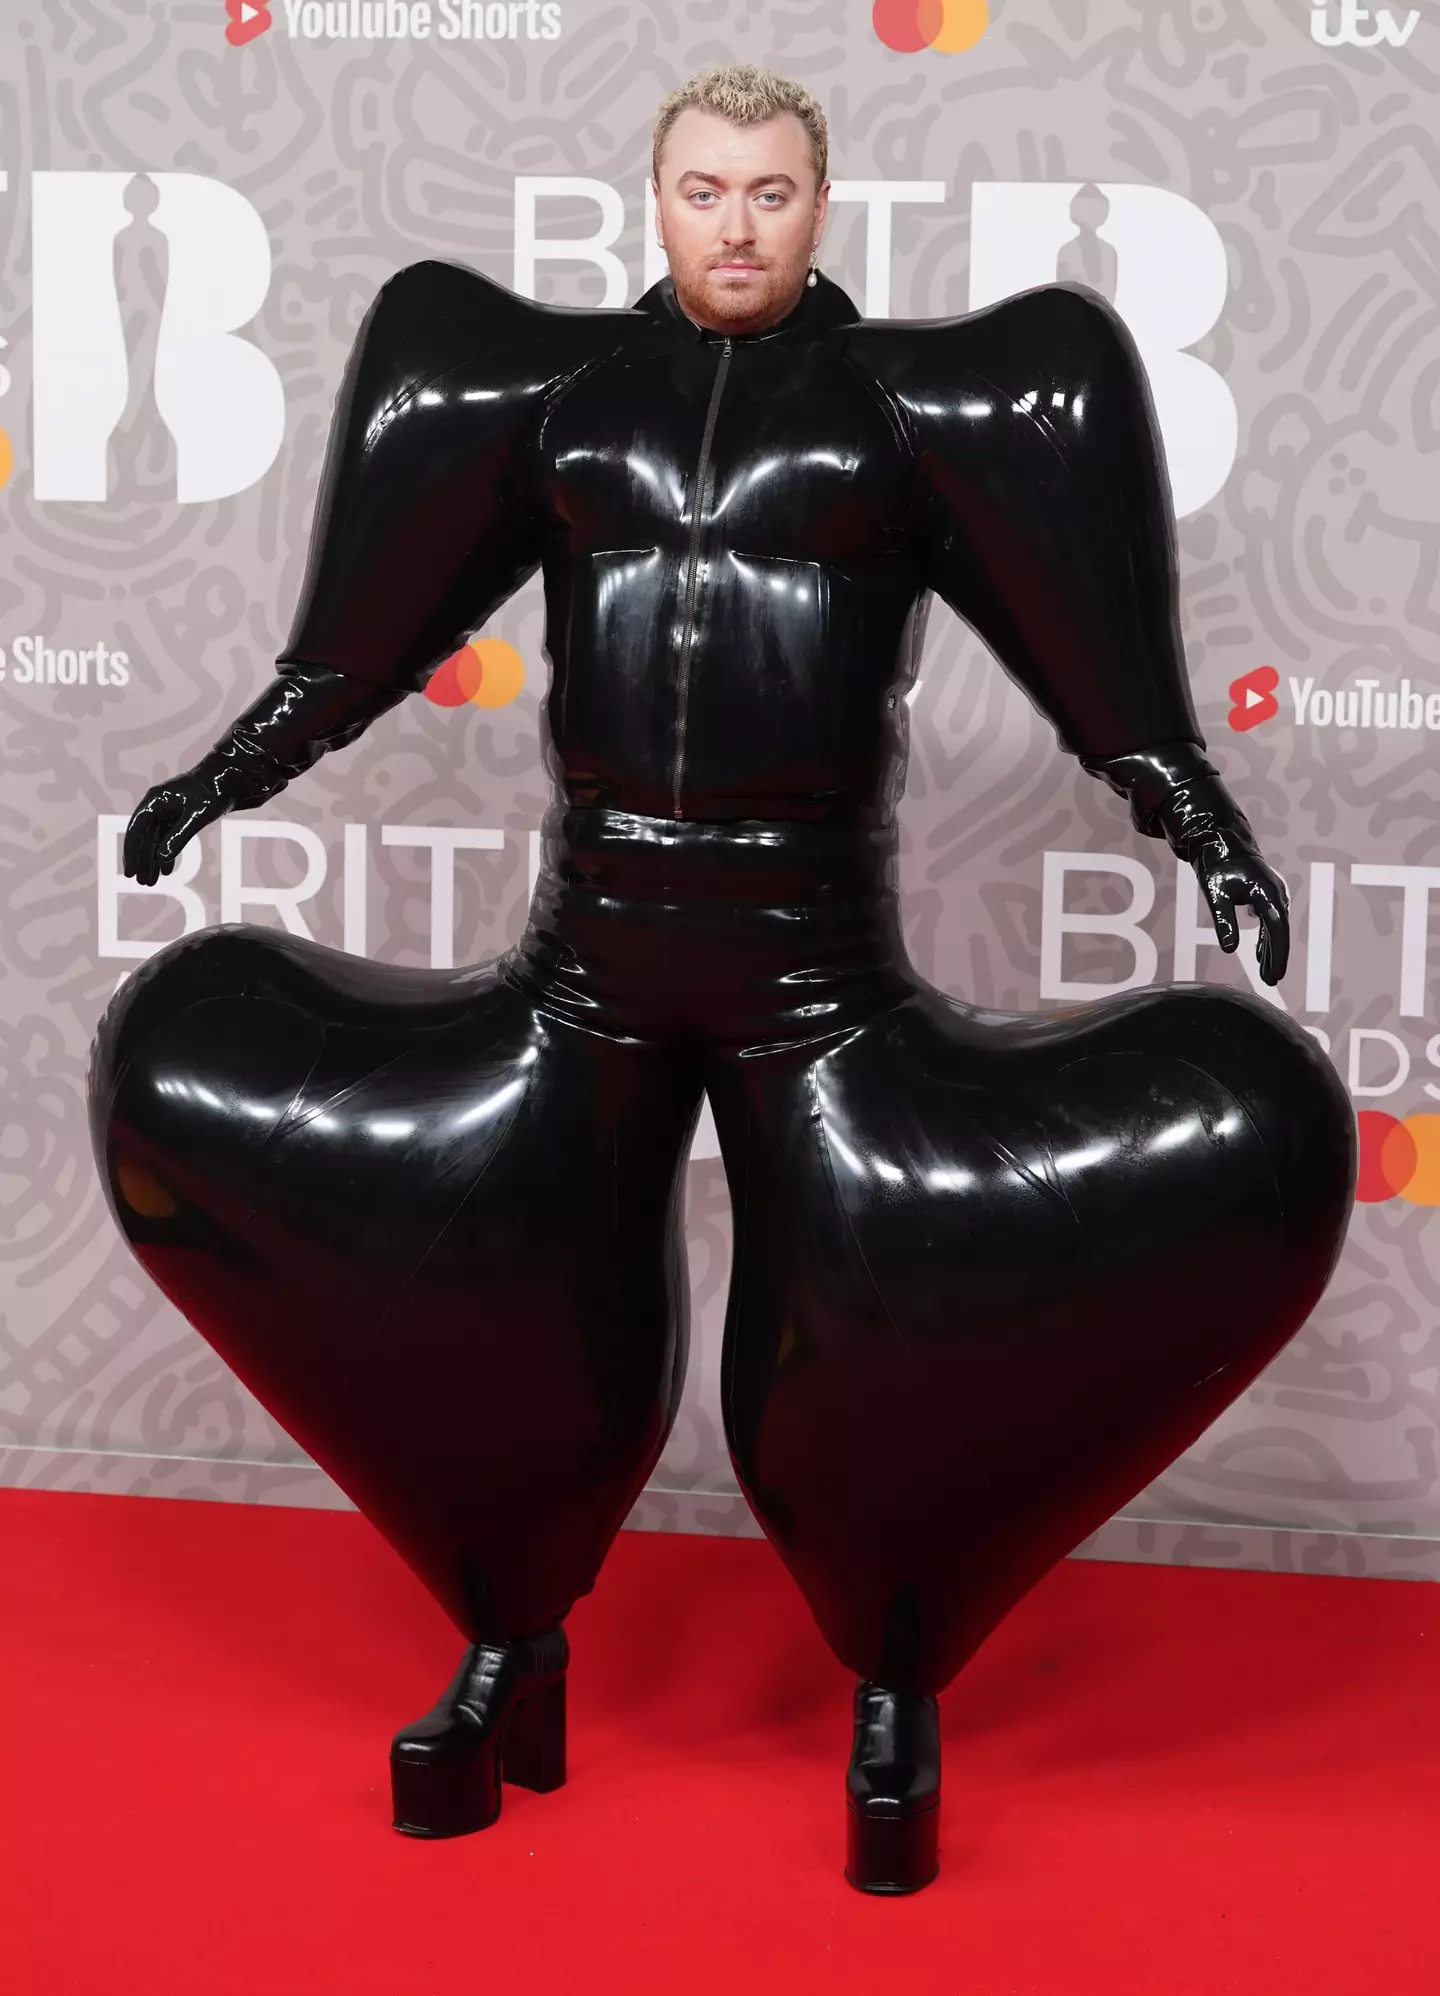 Smith's bold outfit featured inflatable latex trousers.